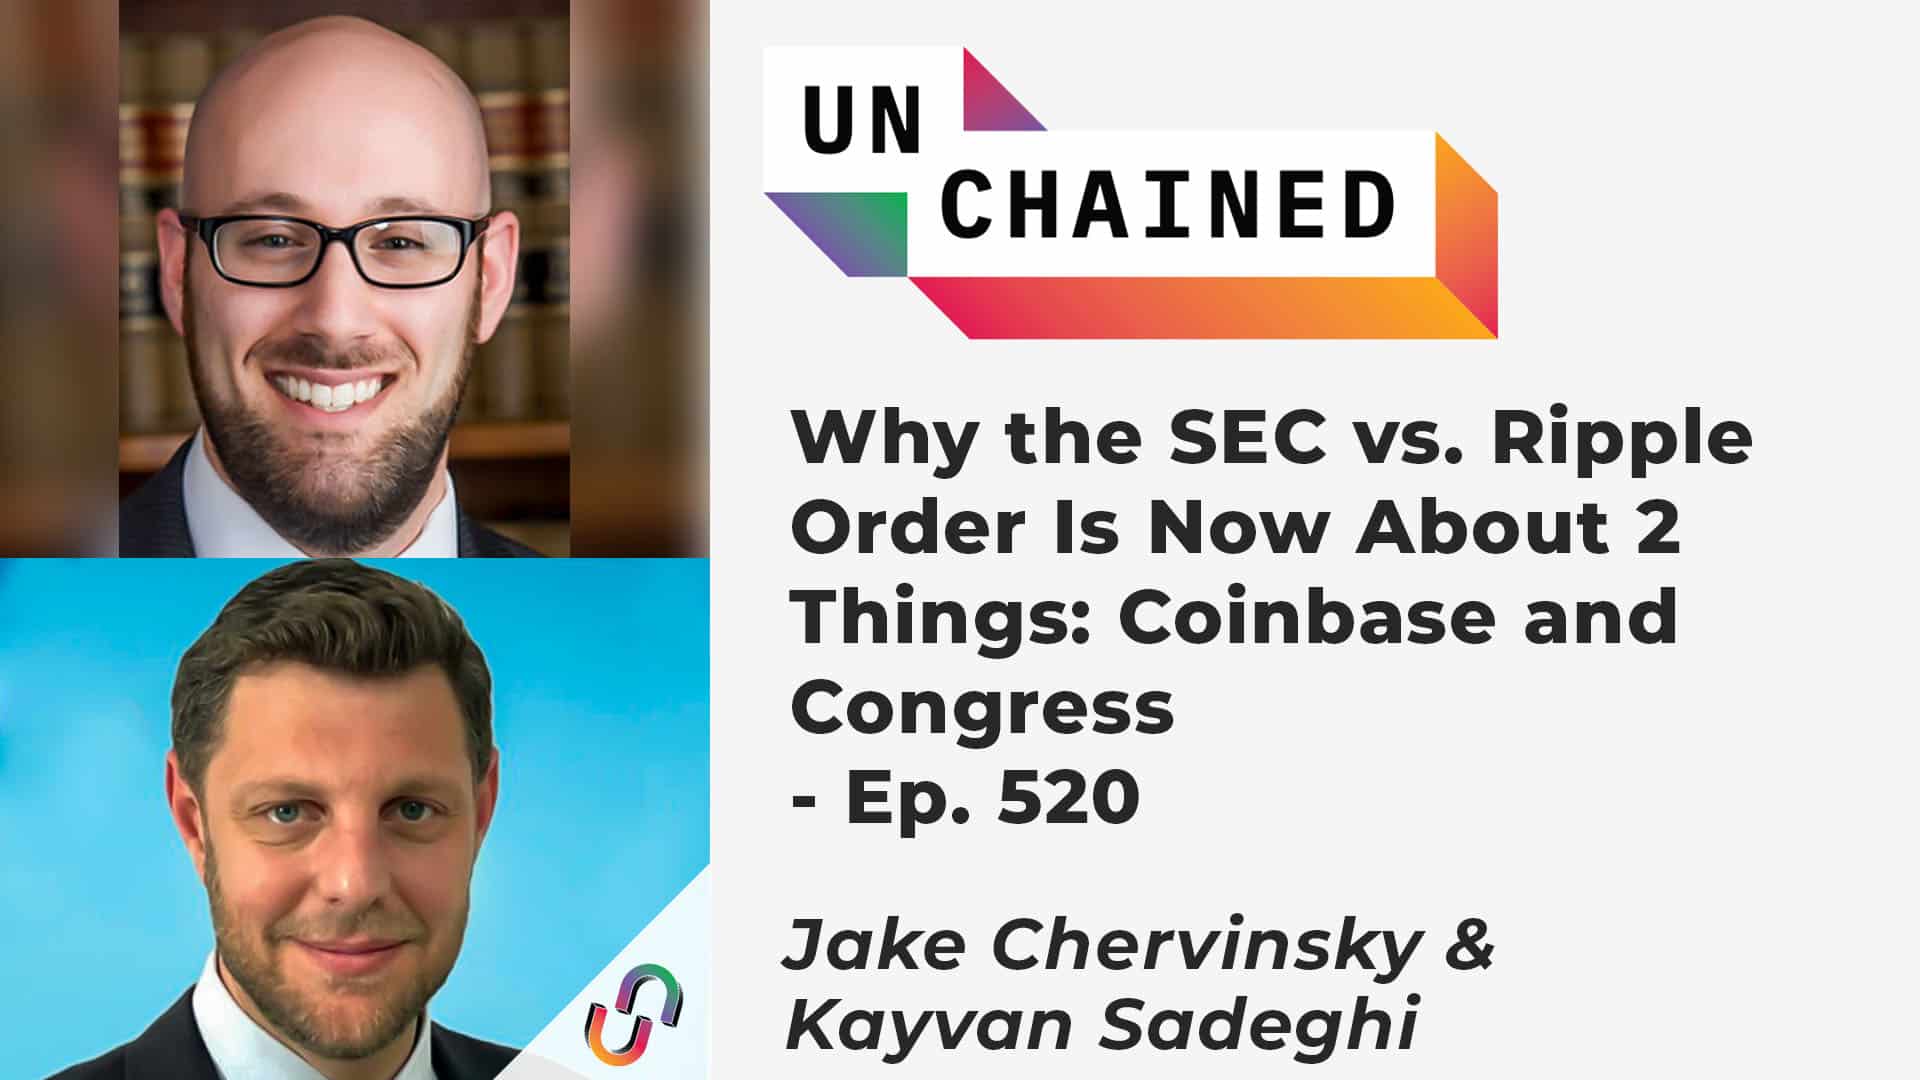 Why the SEC vs. Ripple Order Is Now About 2 Things: Coinbase and Congress - Ep. 520